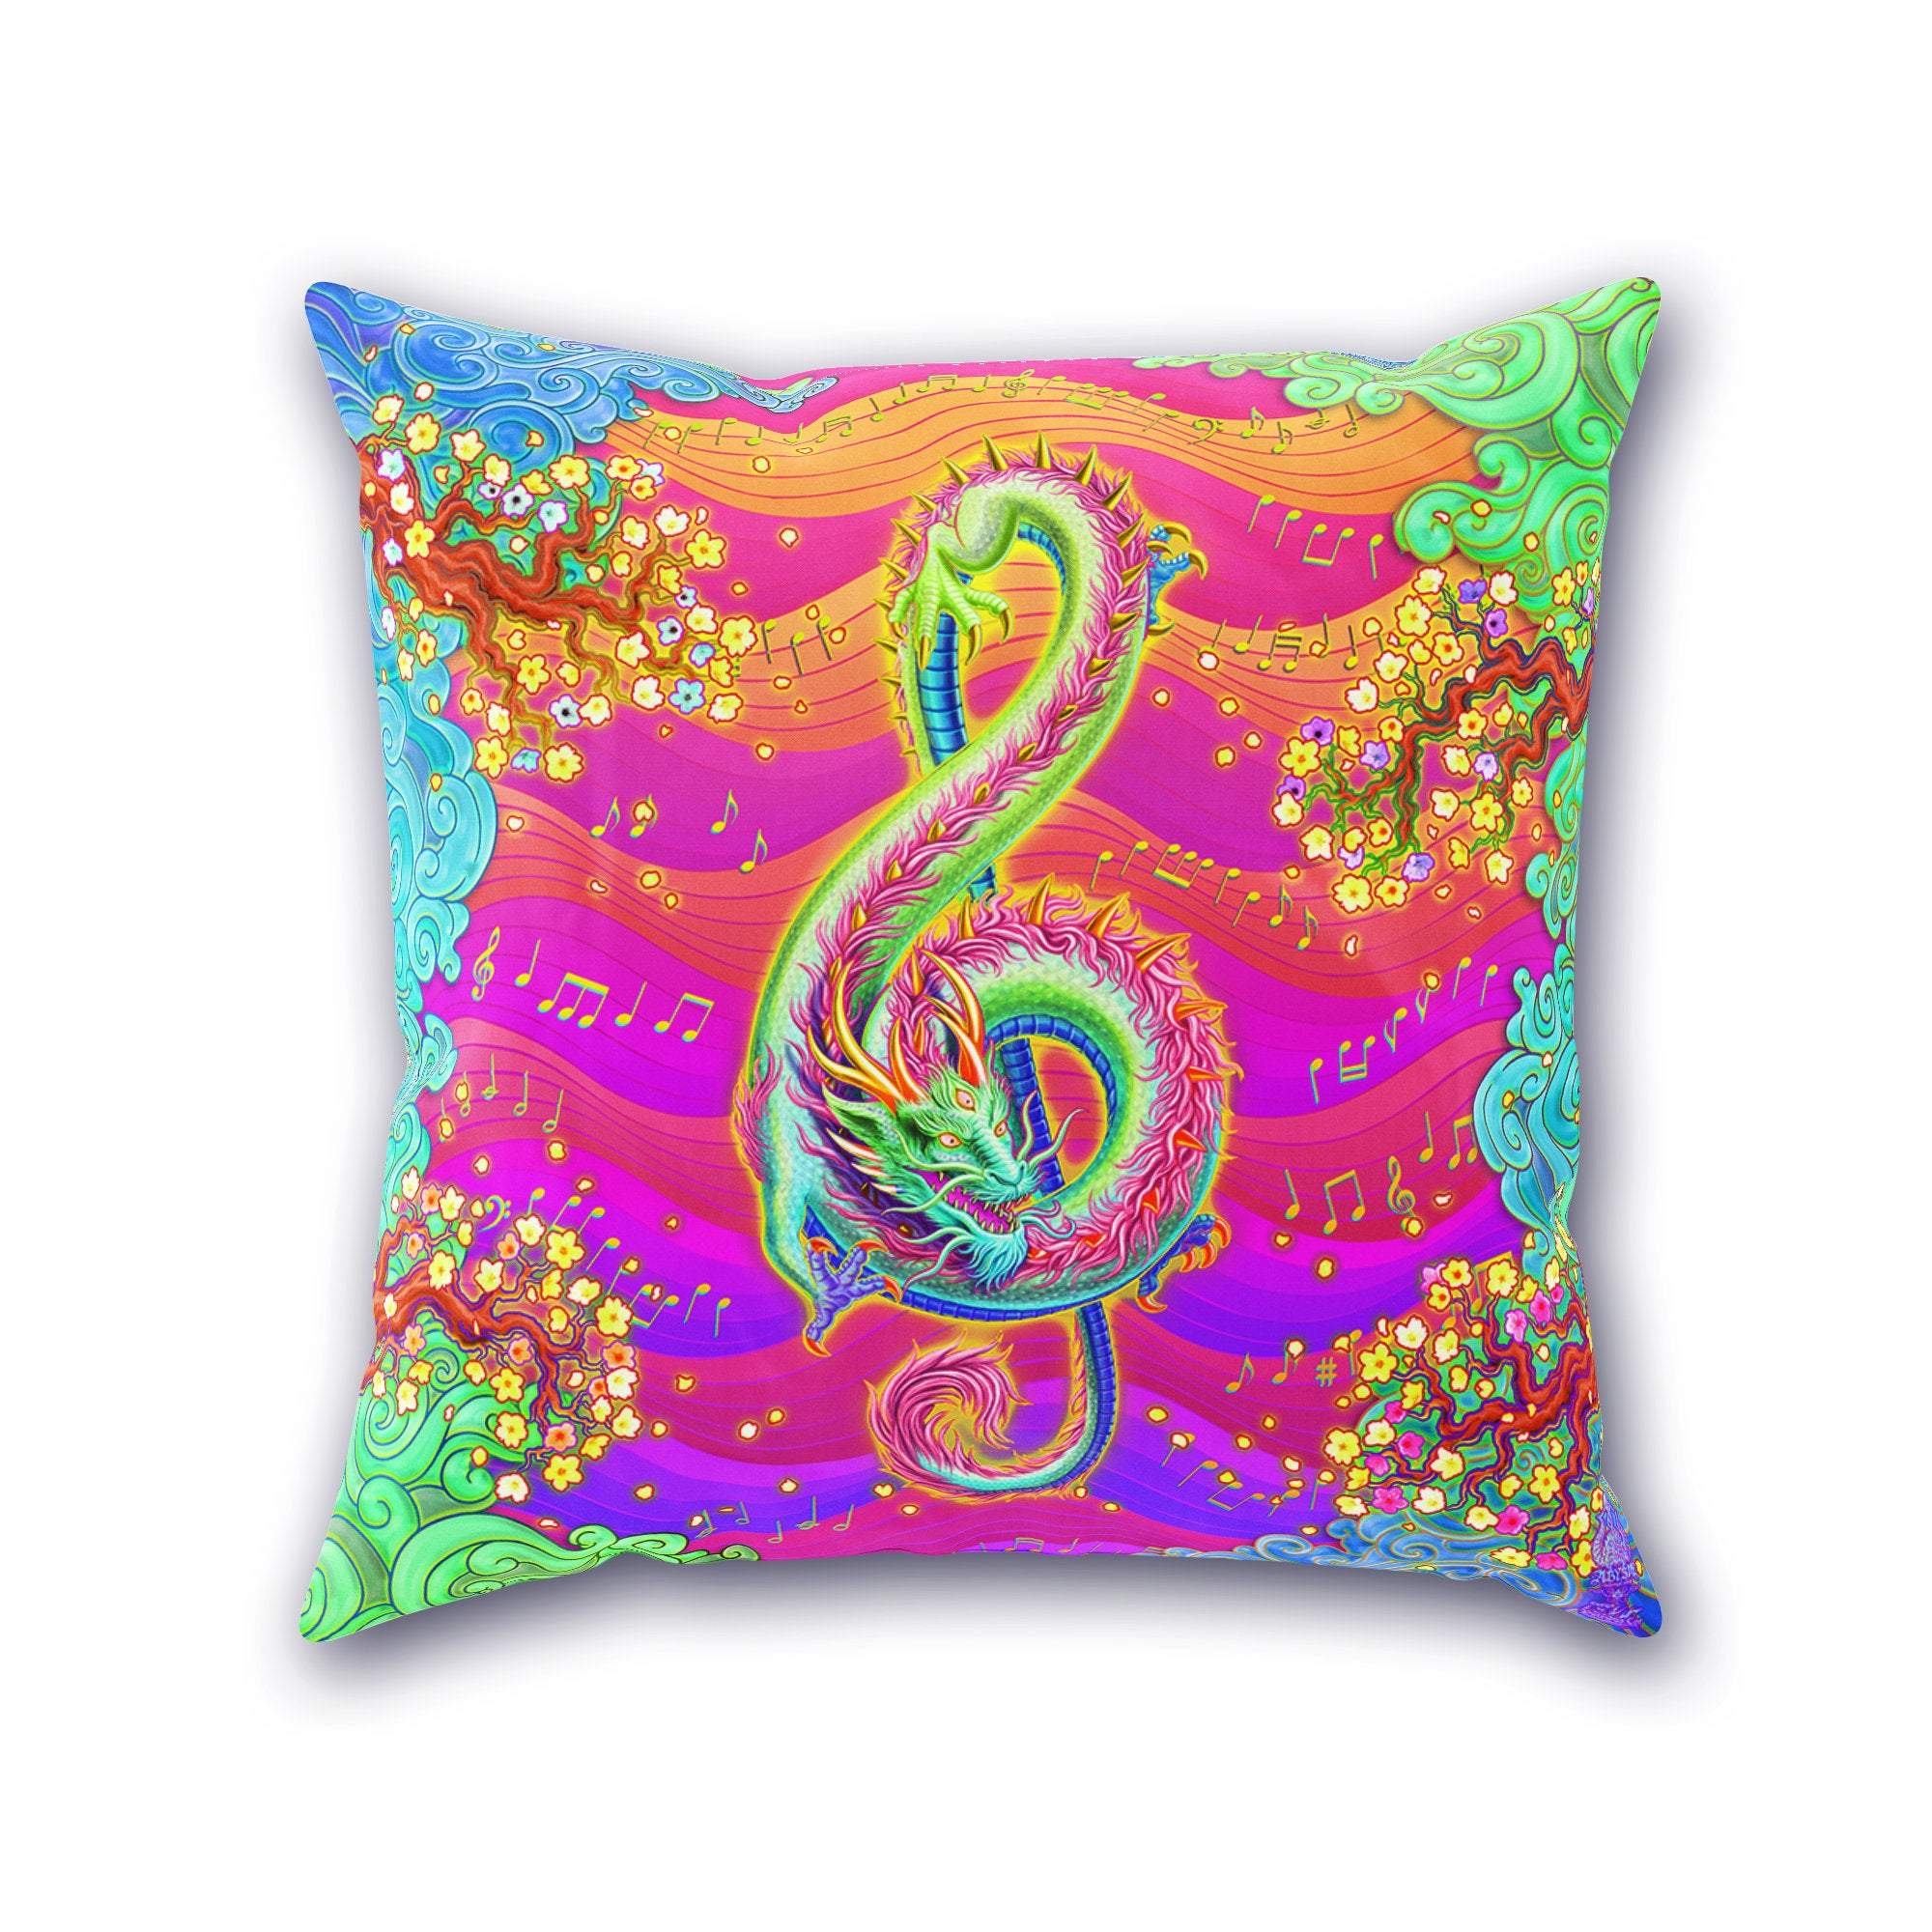 Psychedelic Throw Pillow, Decorative Accent Cushion, Eclectic Home Decor, Music Room, Kidcore - Treble Clef, Psy Neon Dragon - Abysm Internal